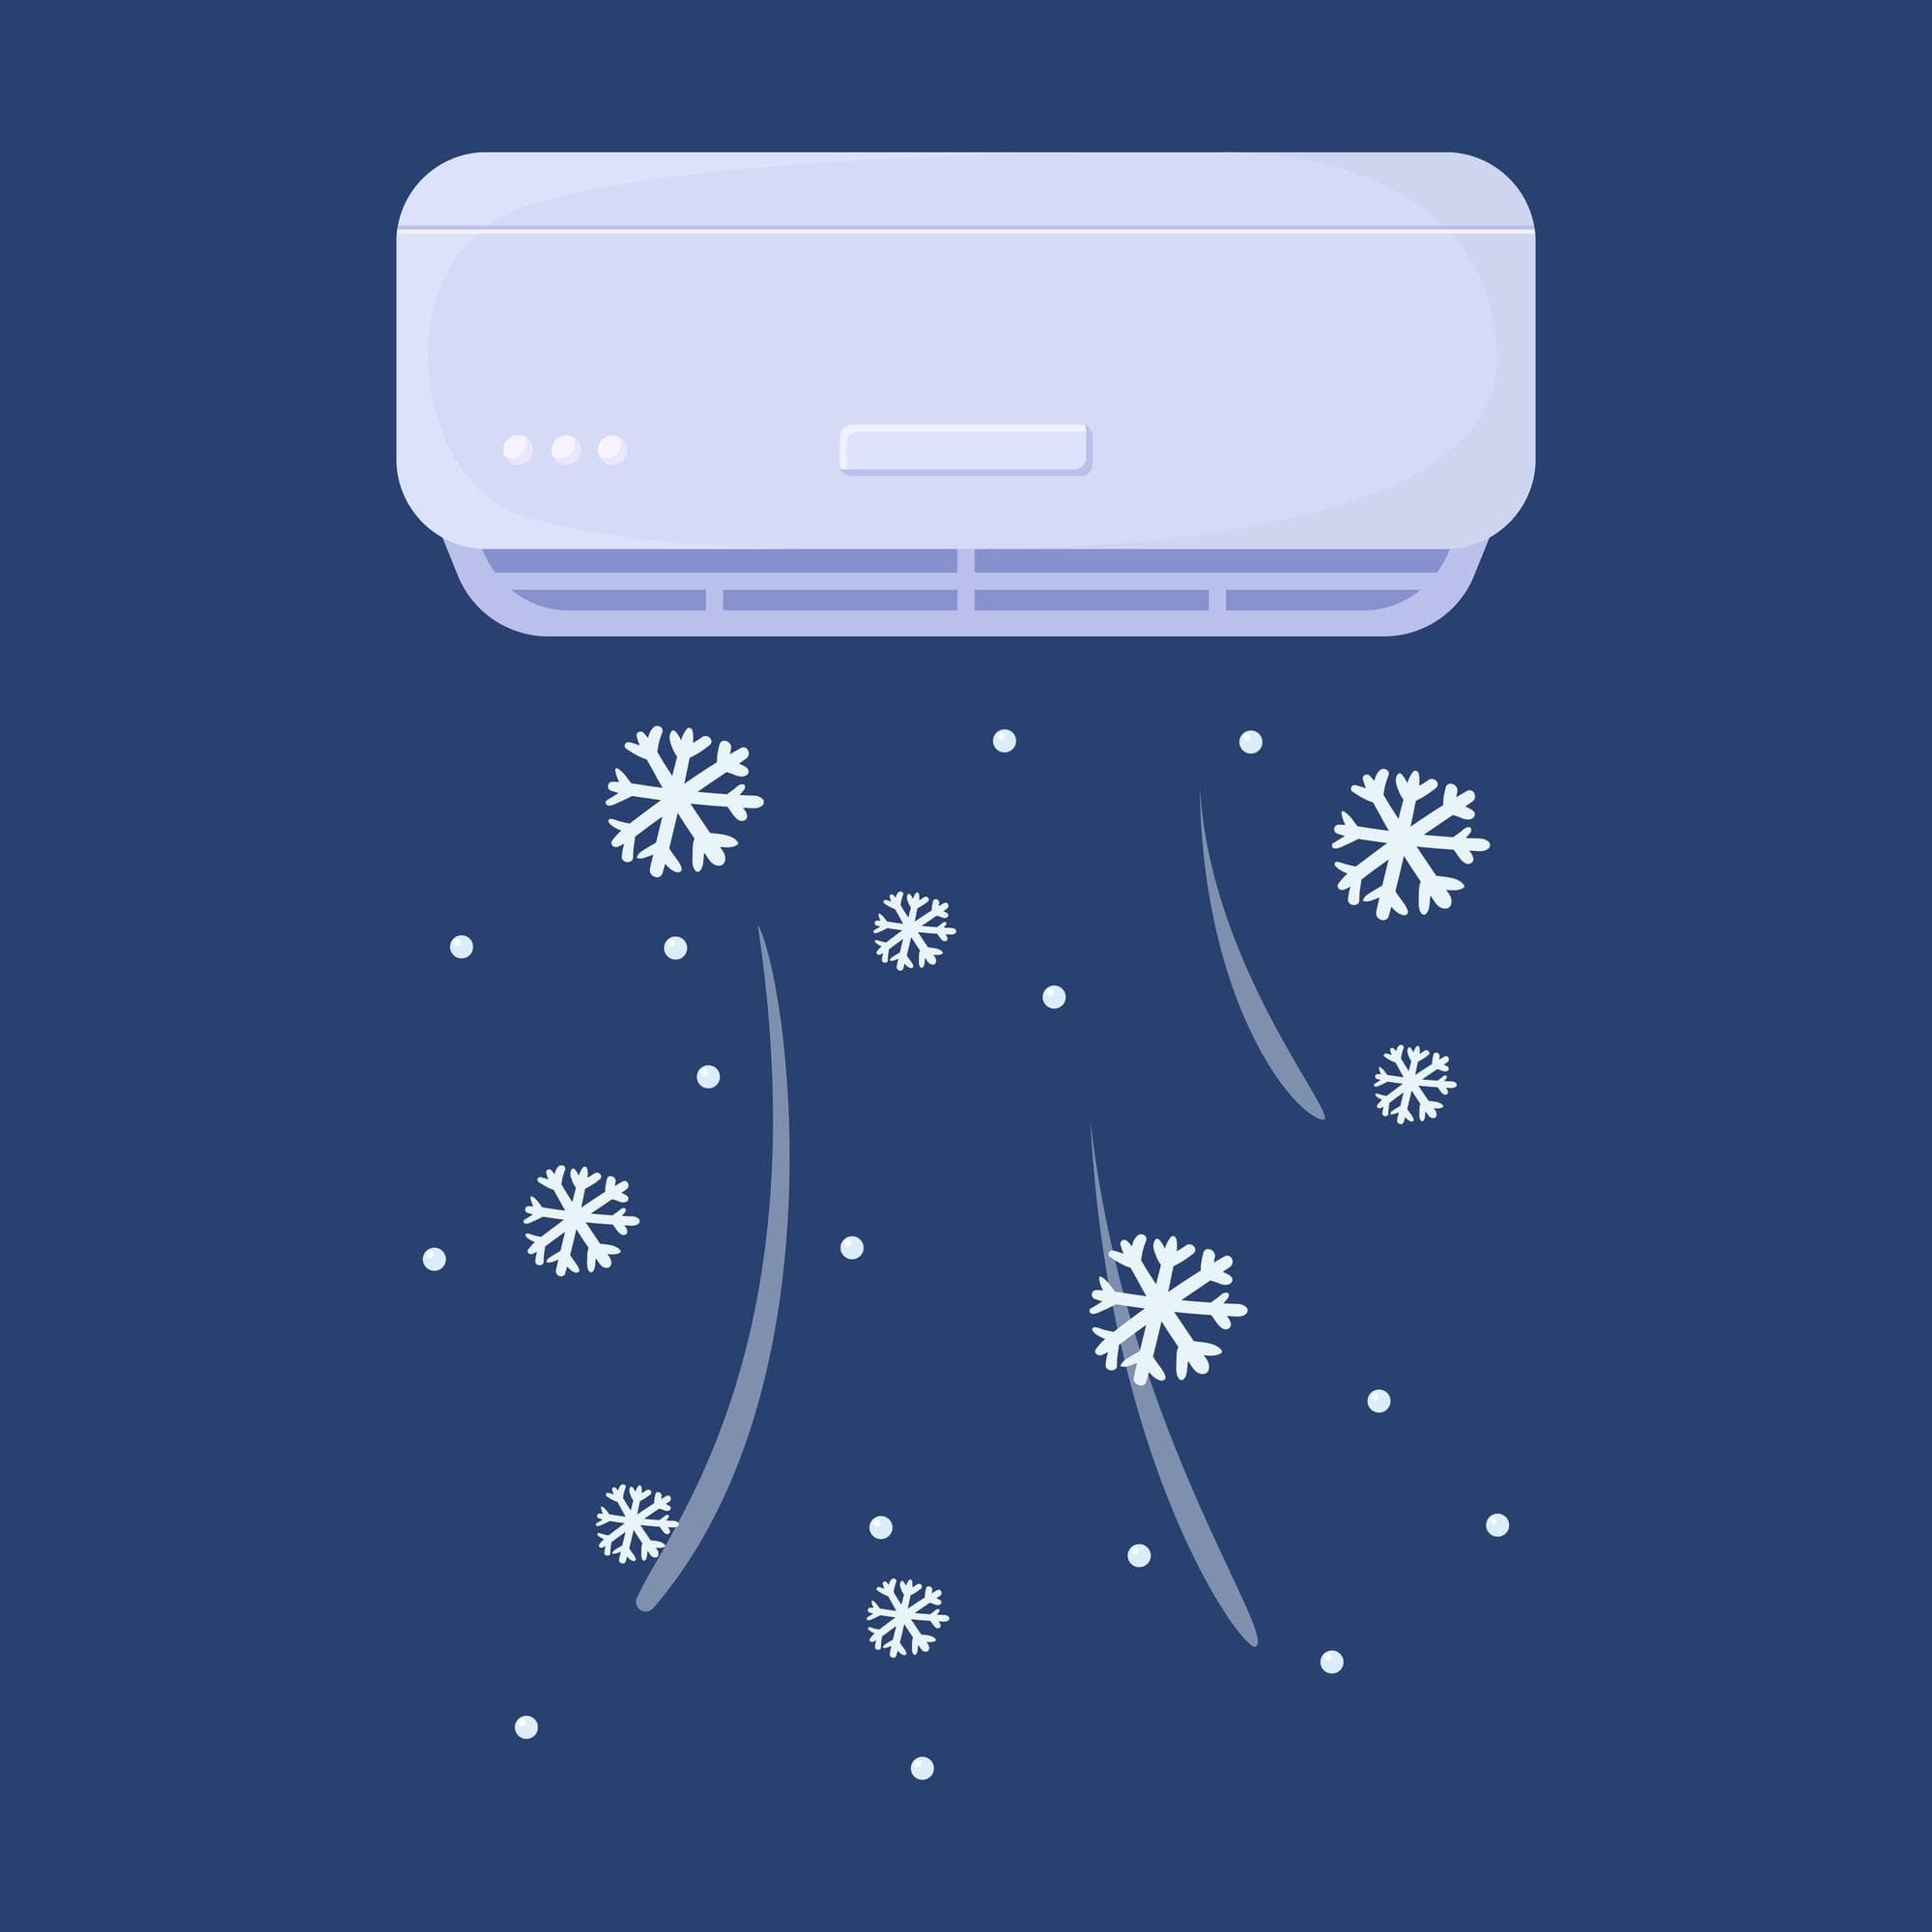 air-conditioner-blowing-out-cold-air-vector-illustration_778687-83 (1)